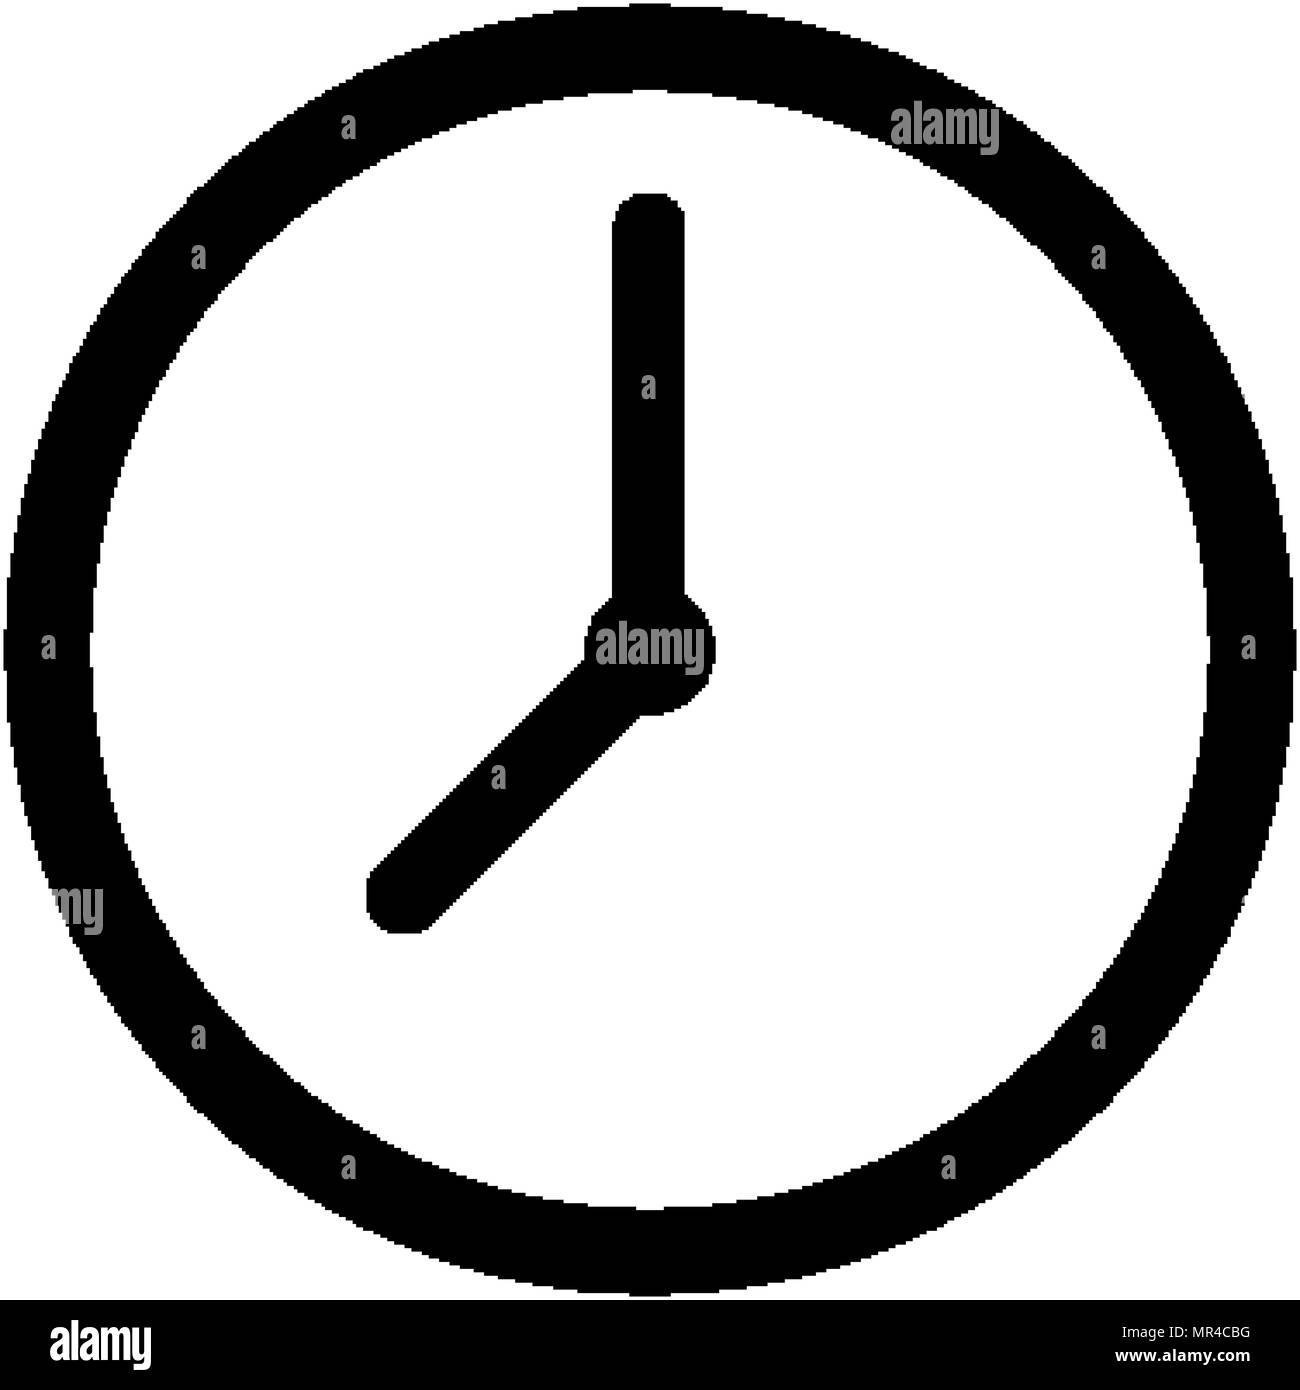 Simple time clock icon isolated on background Stock Vector